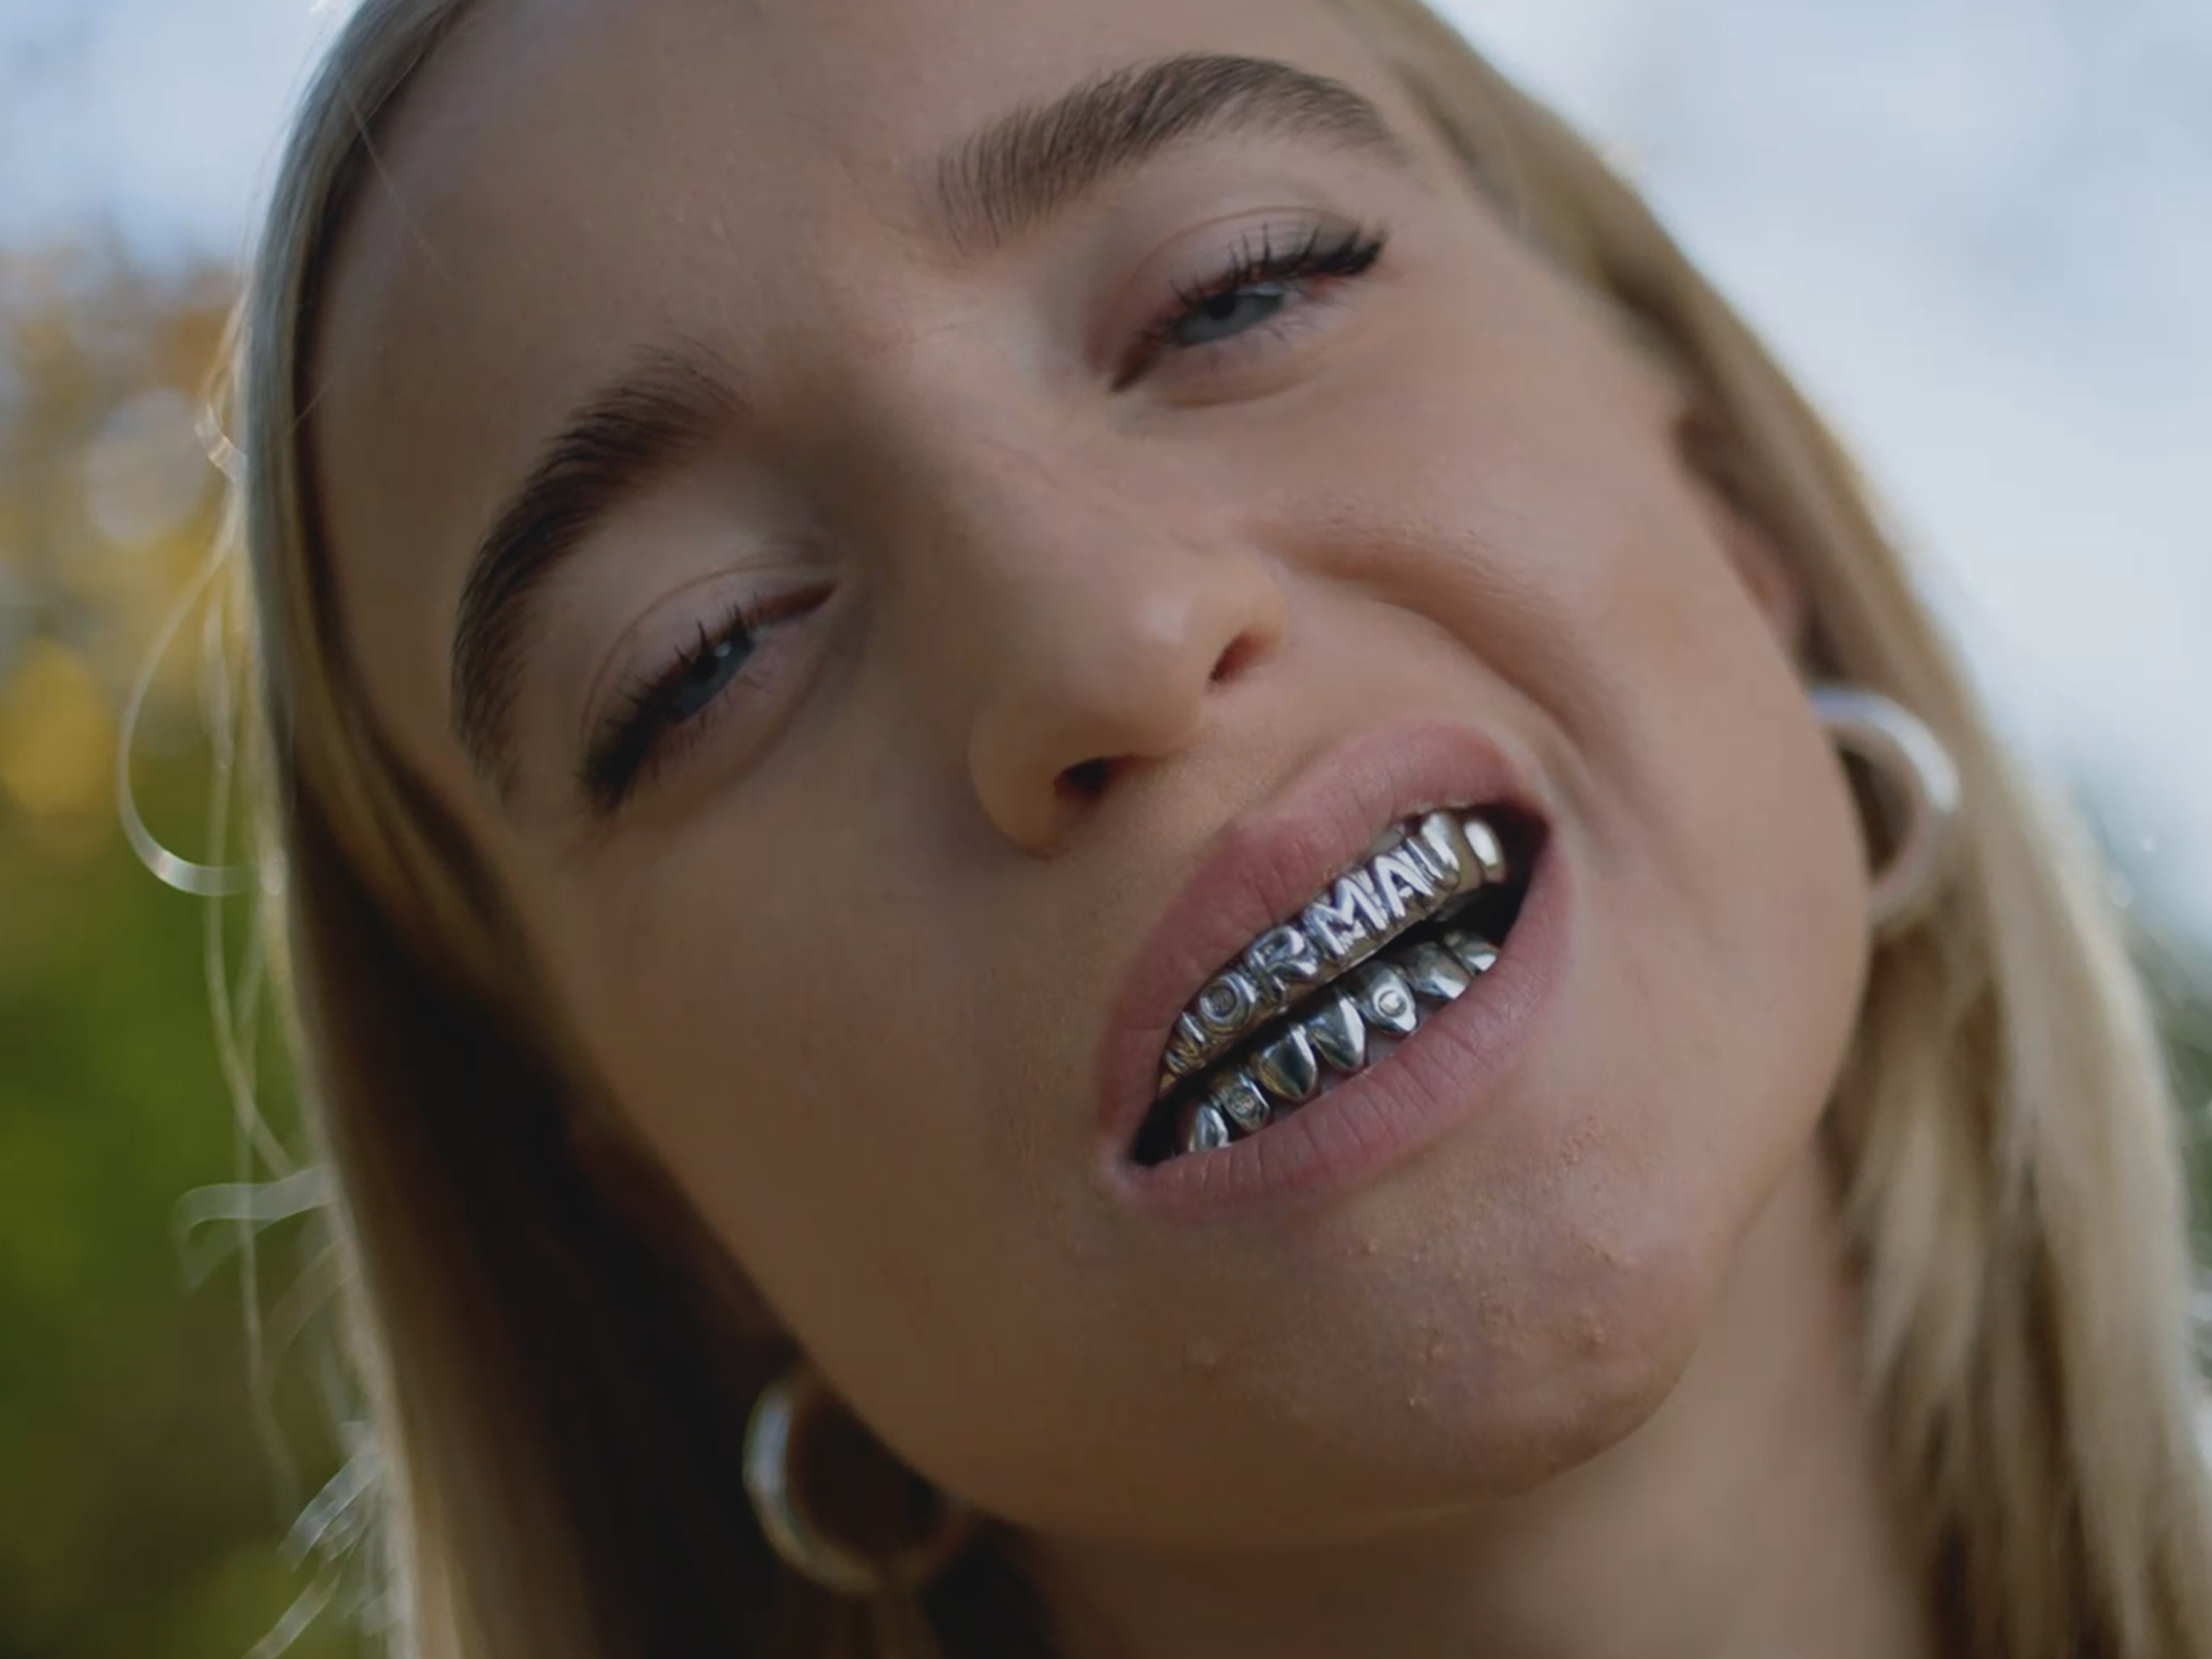 Image of the face of a blonde woman with grillz. The image is part of the image campaign "ist doch ganz normal" by Jung von Matt LIMMAT for PostFinance.